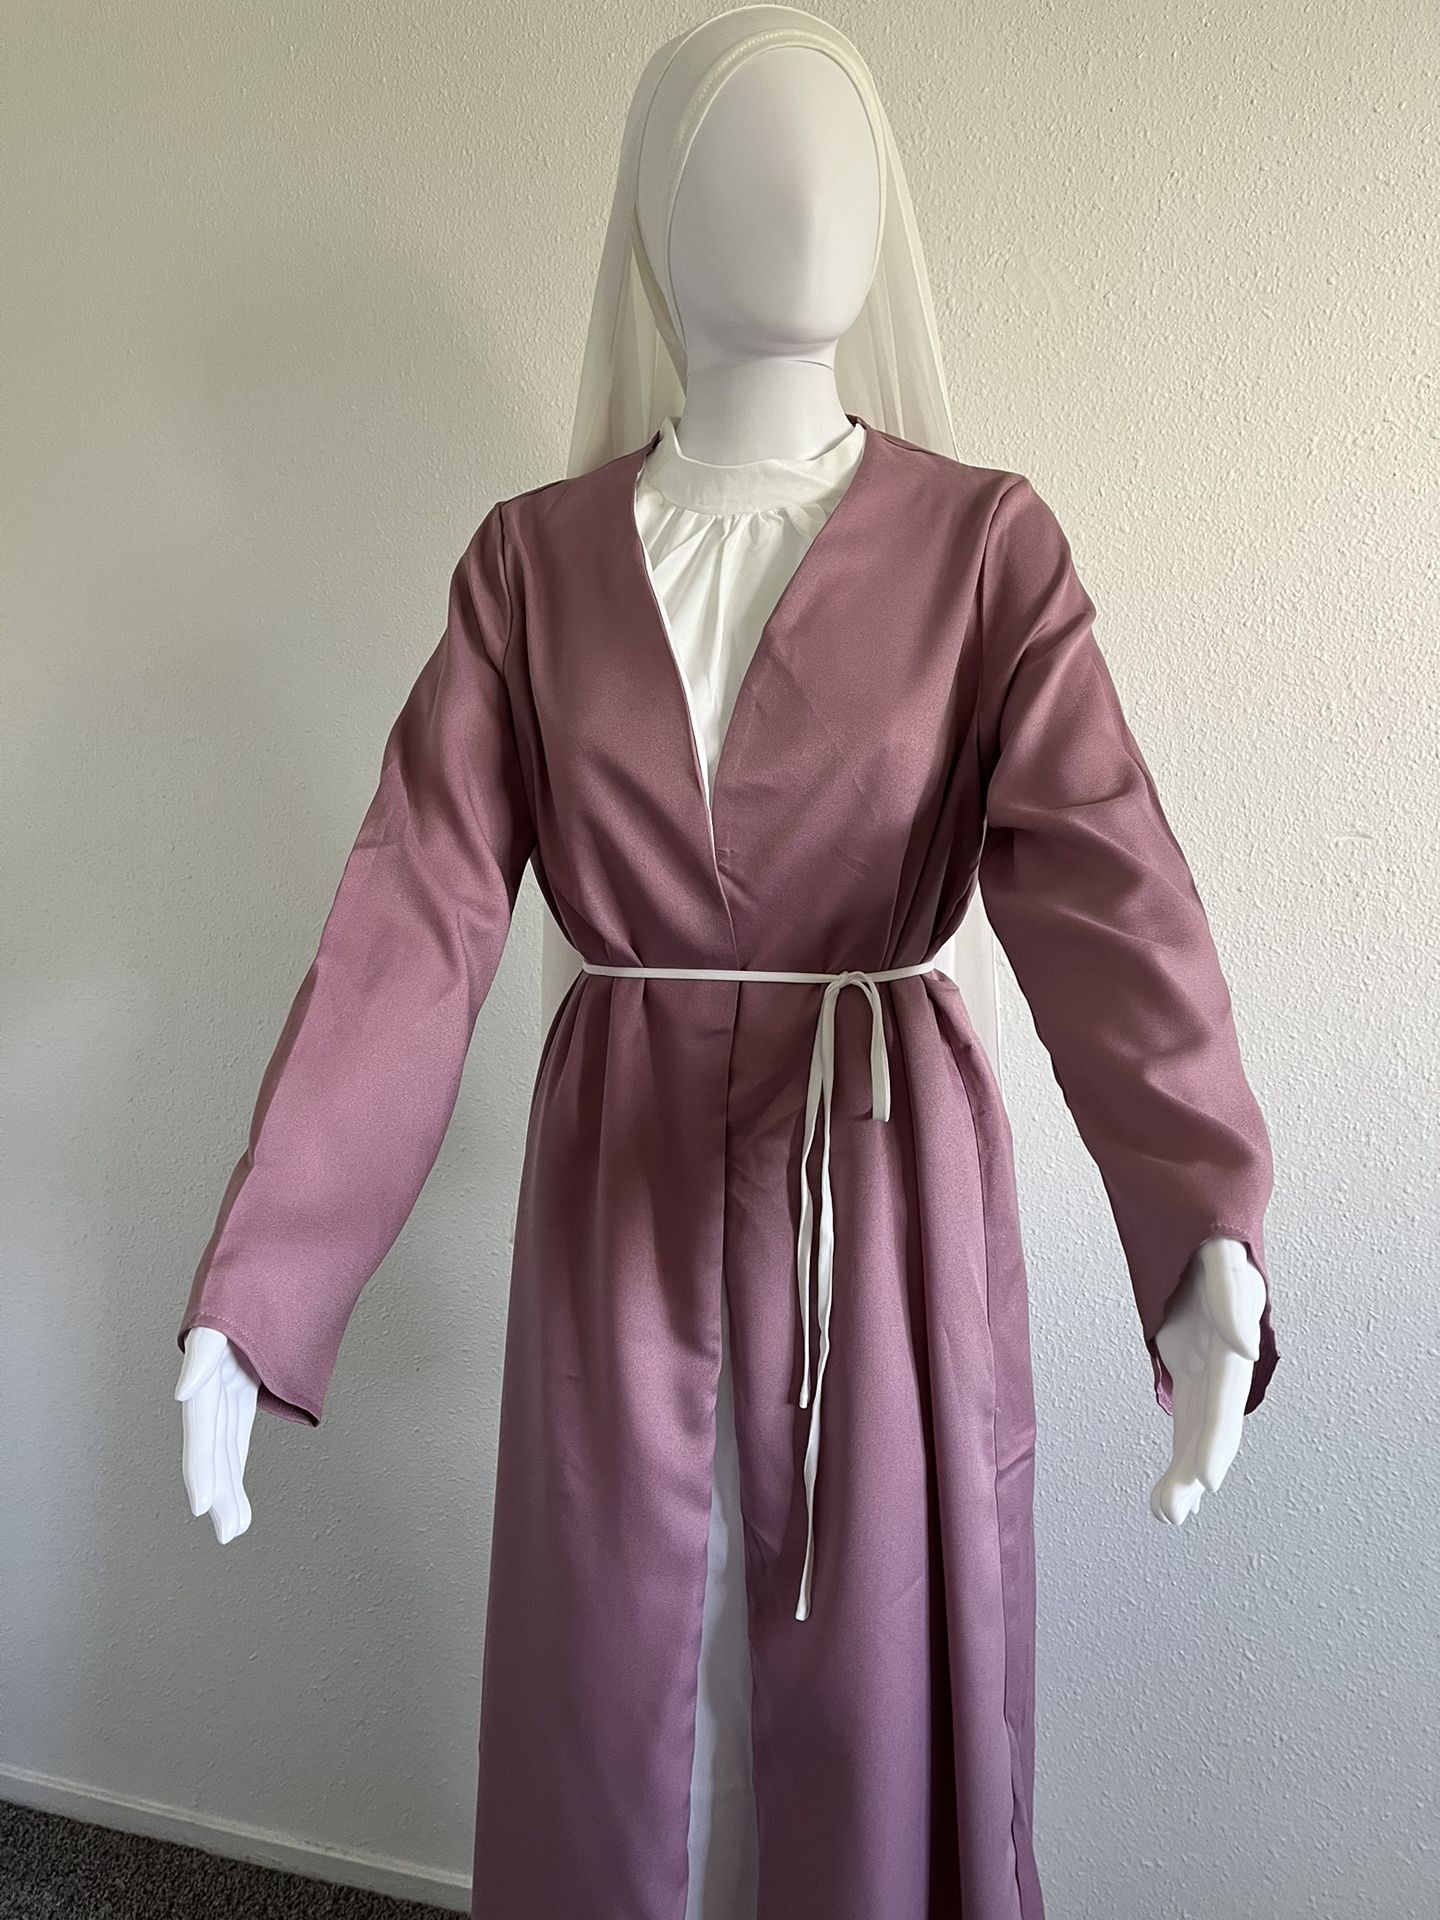 A Beautiful Belted Abaya, Caot And Outerwear